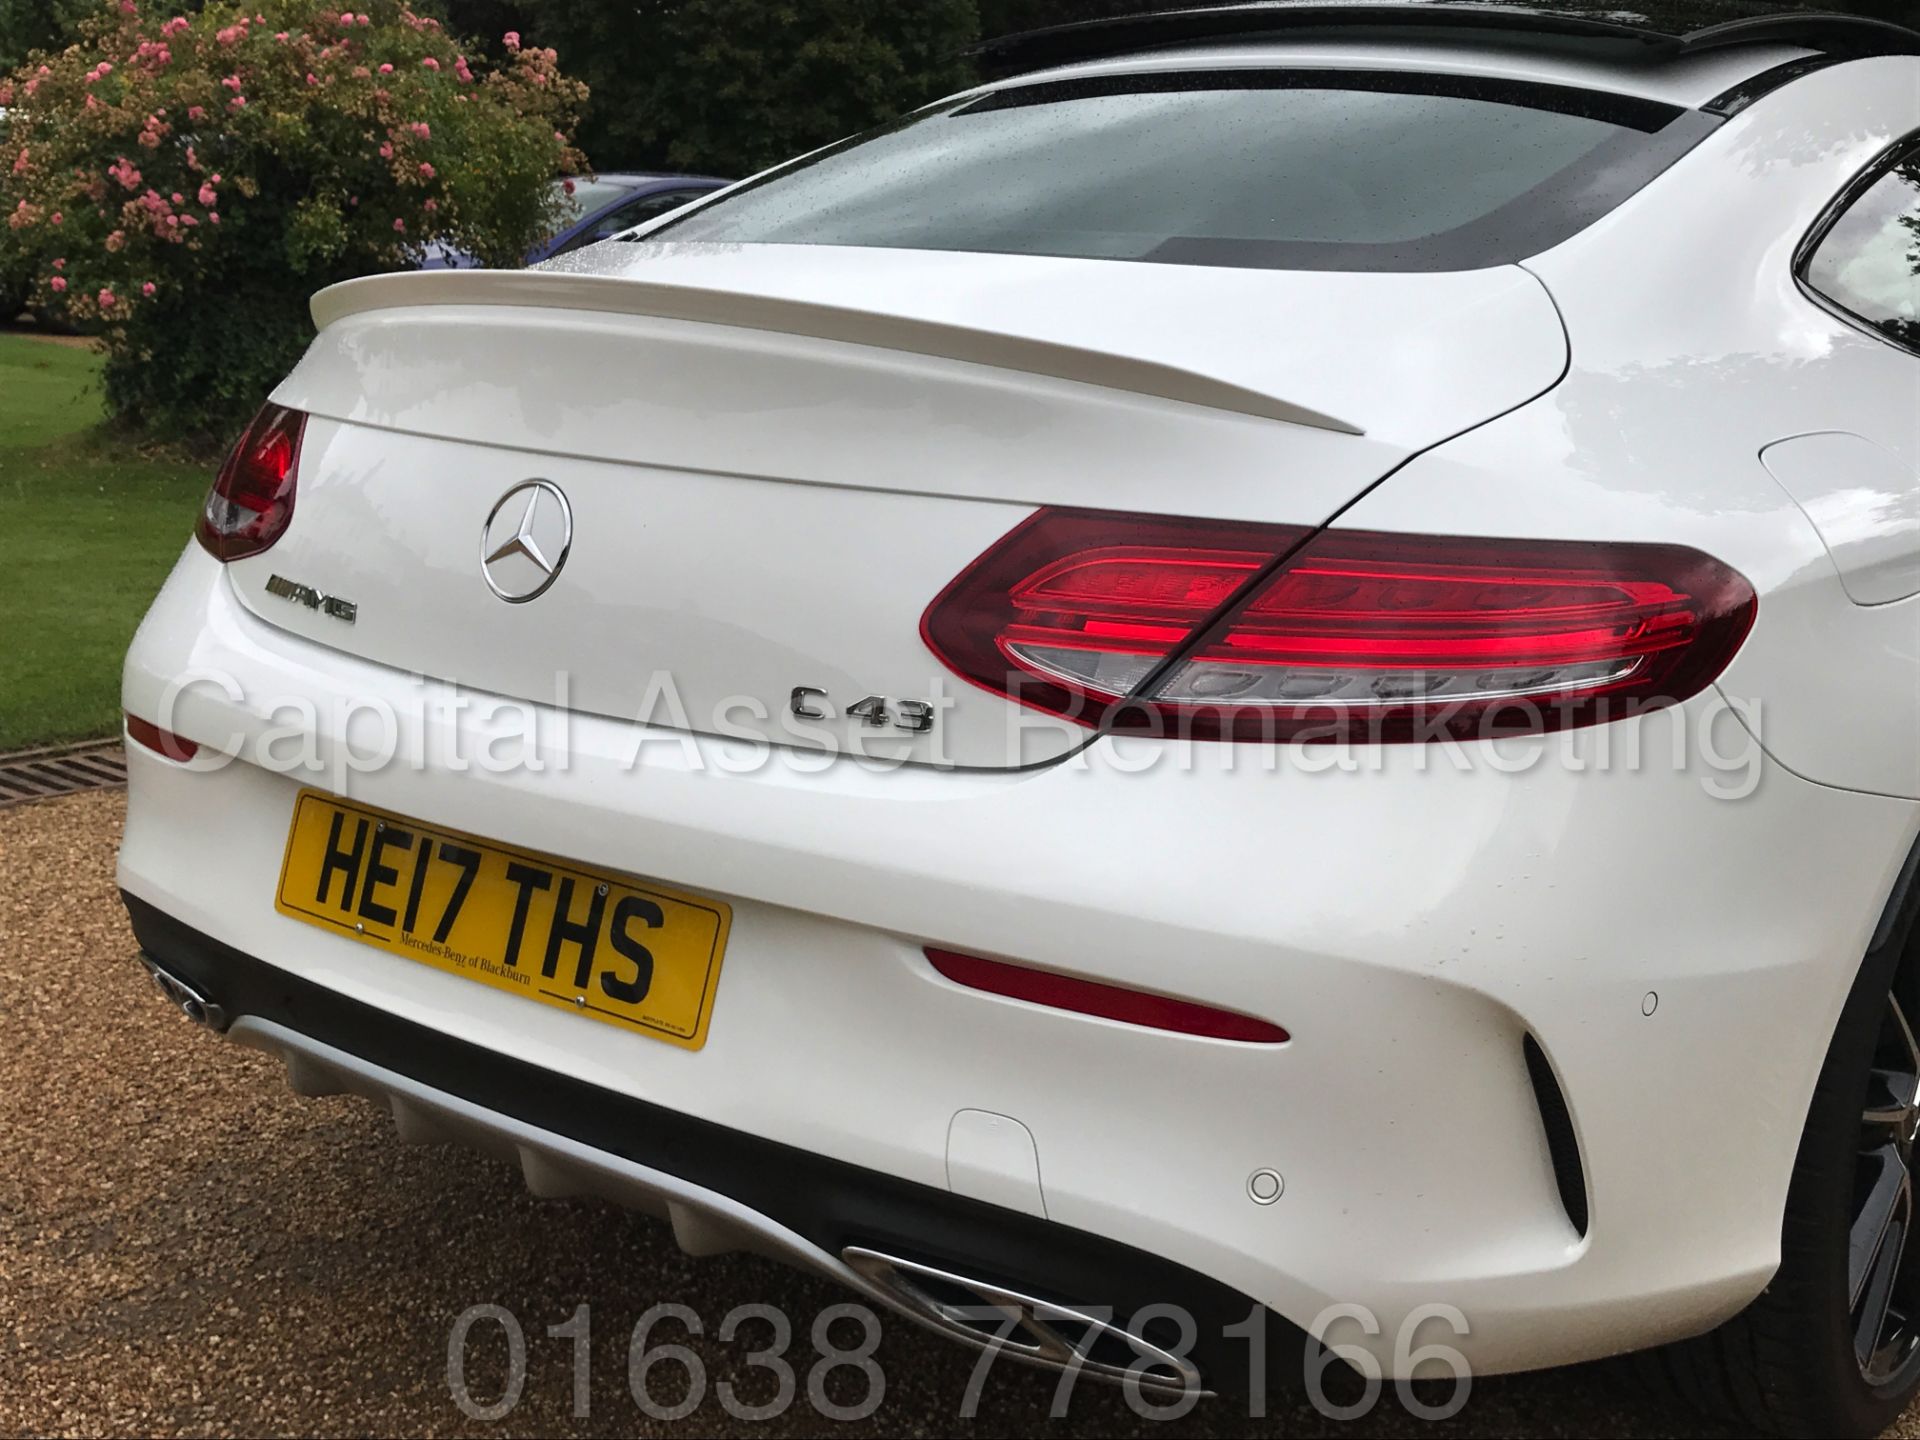 MEREDES-BENZ C43 AMG PREMIUM '4 MATIC' COUPE (2017) '9-G AUTO - LEATHER - SAT NAV' **FULLY LOADED** - Image 16 of 57